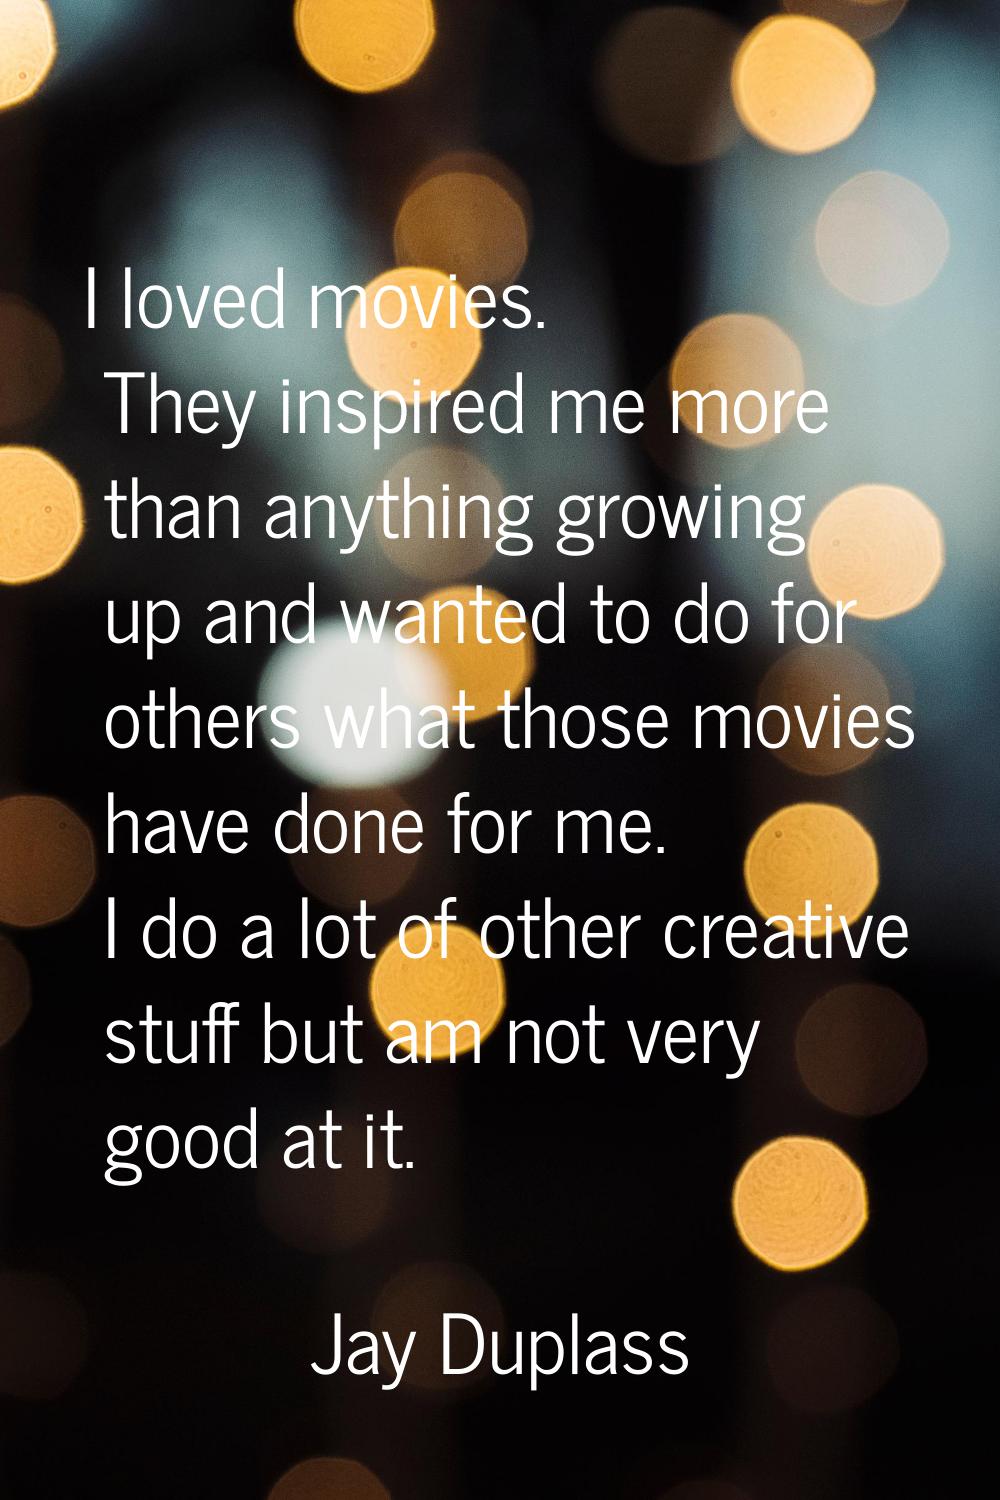 I loved movies. They inspired me more than anything growing up and wanted to do for others what tho